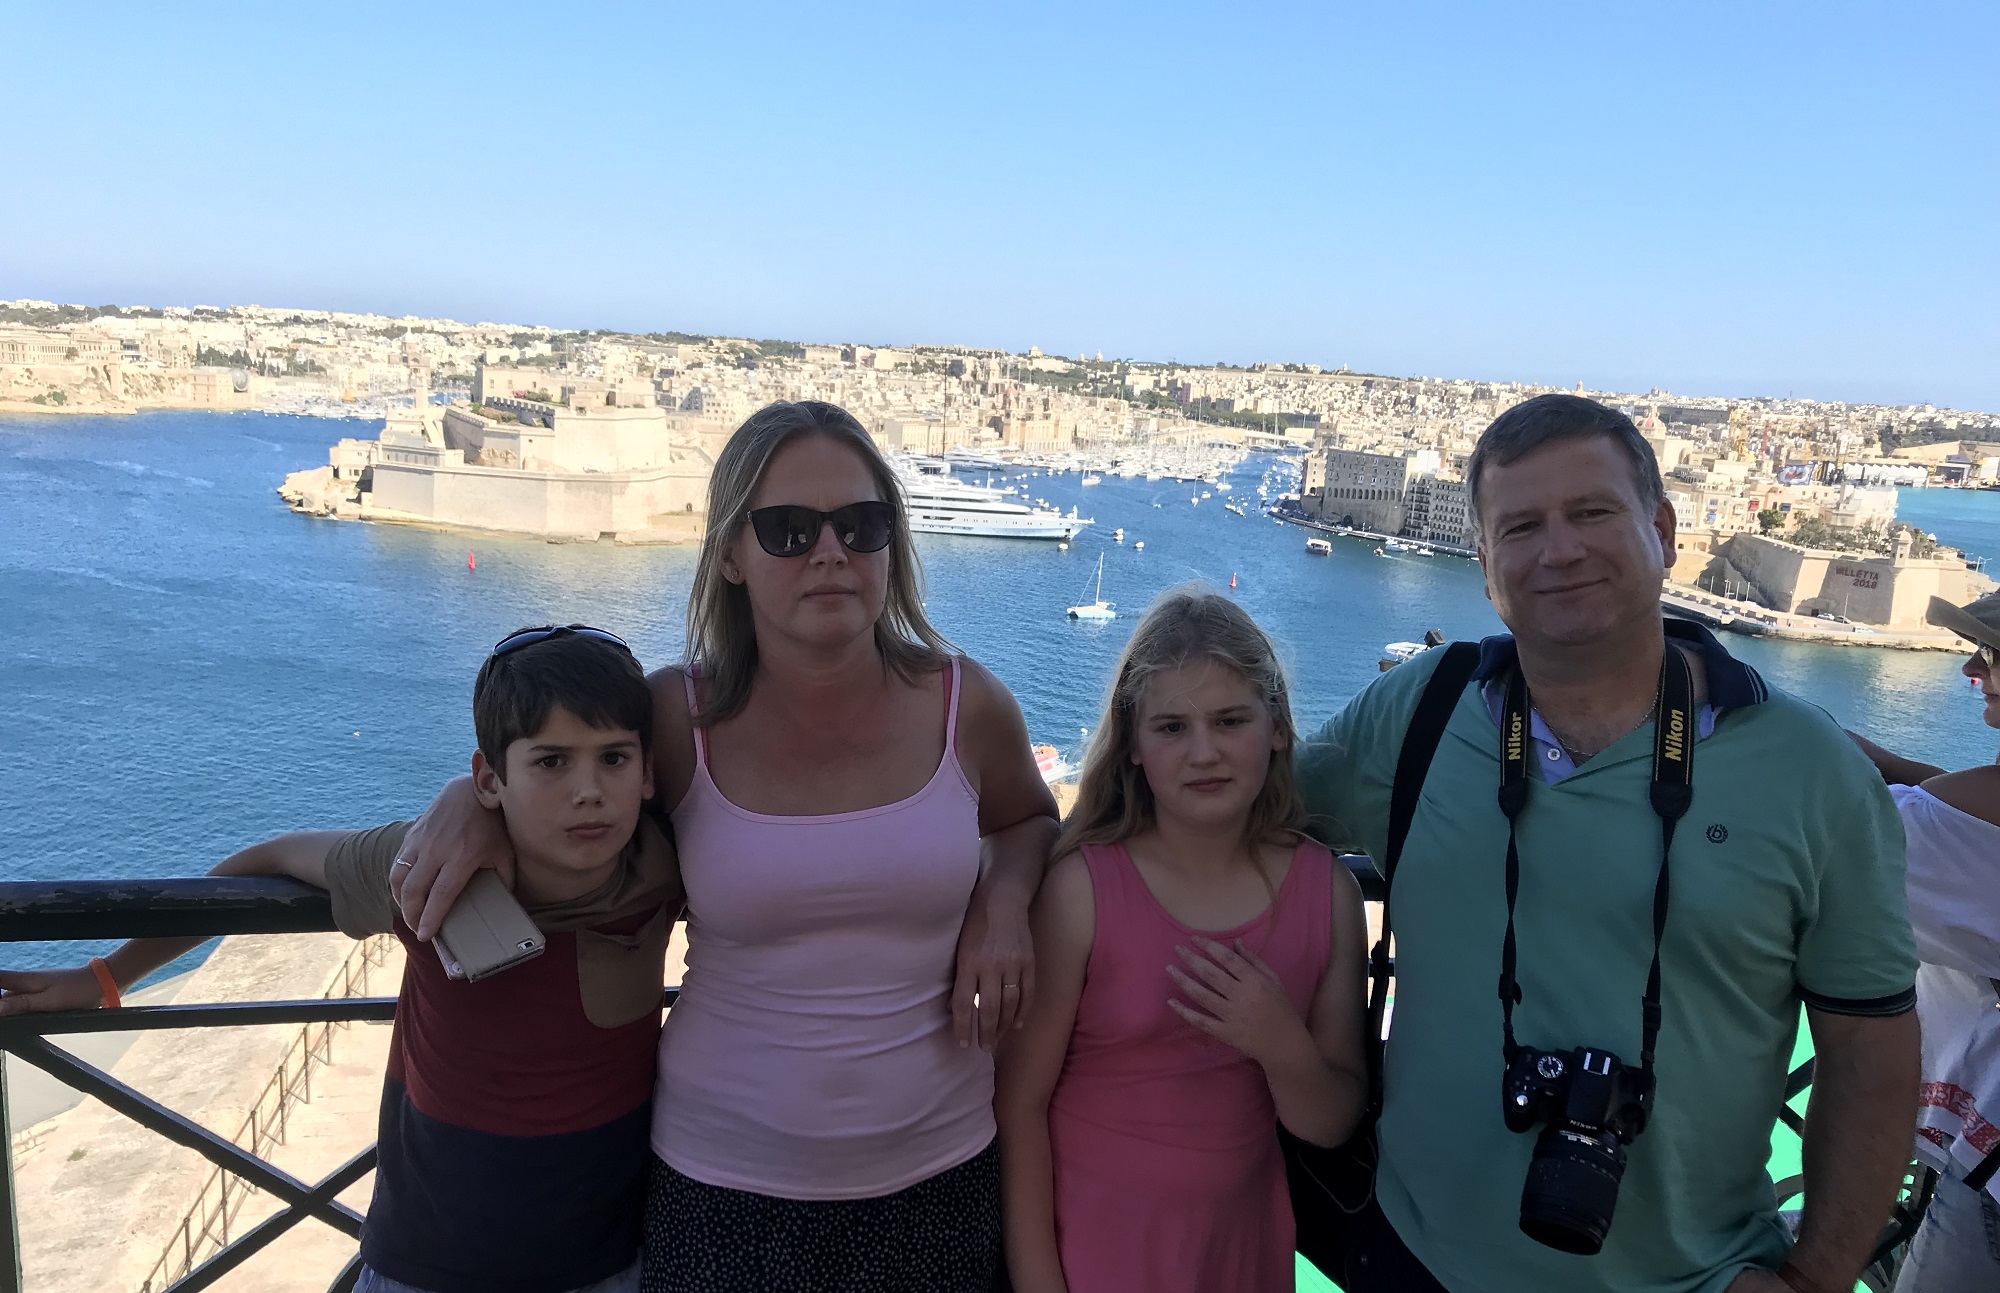 Our student Ildiko moved to Malta with his family